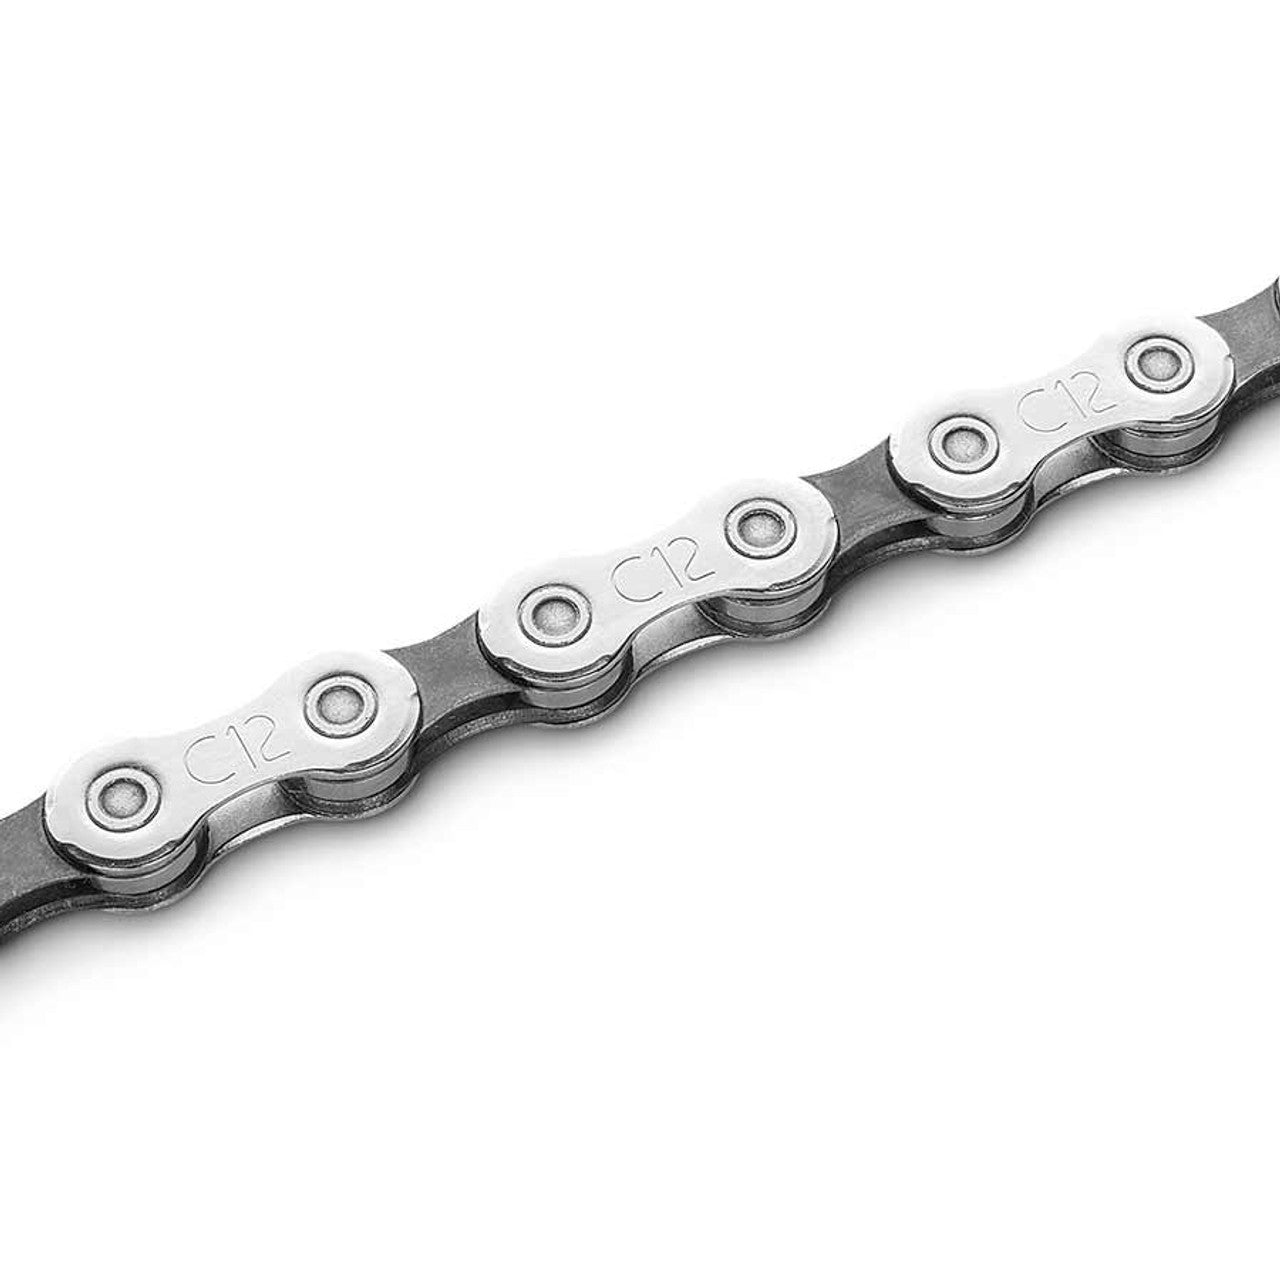 Campagnolo, Chorus, Chain, Speed: 12, 5.15mm, Links: 114, Silver